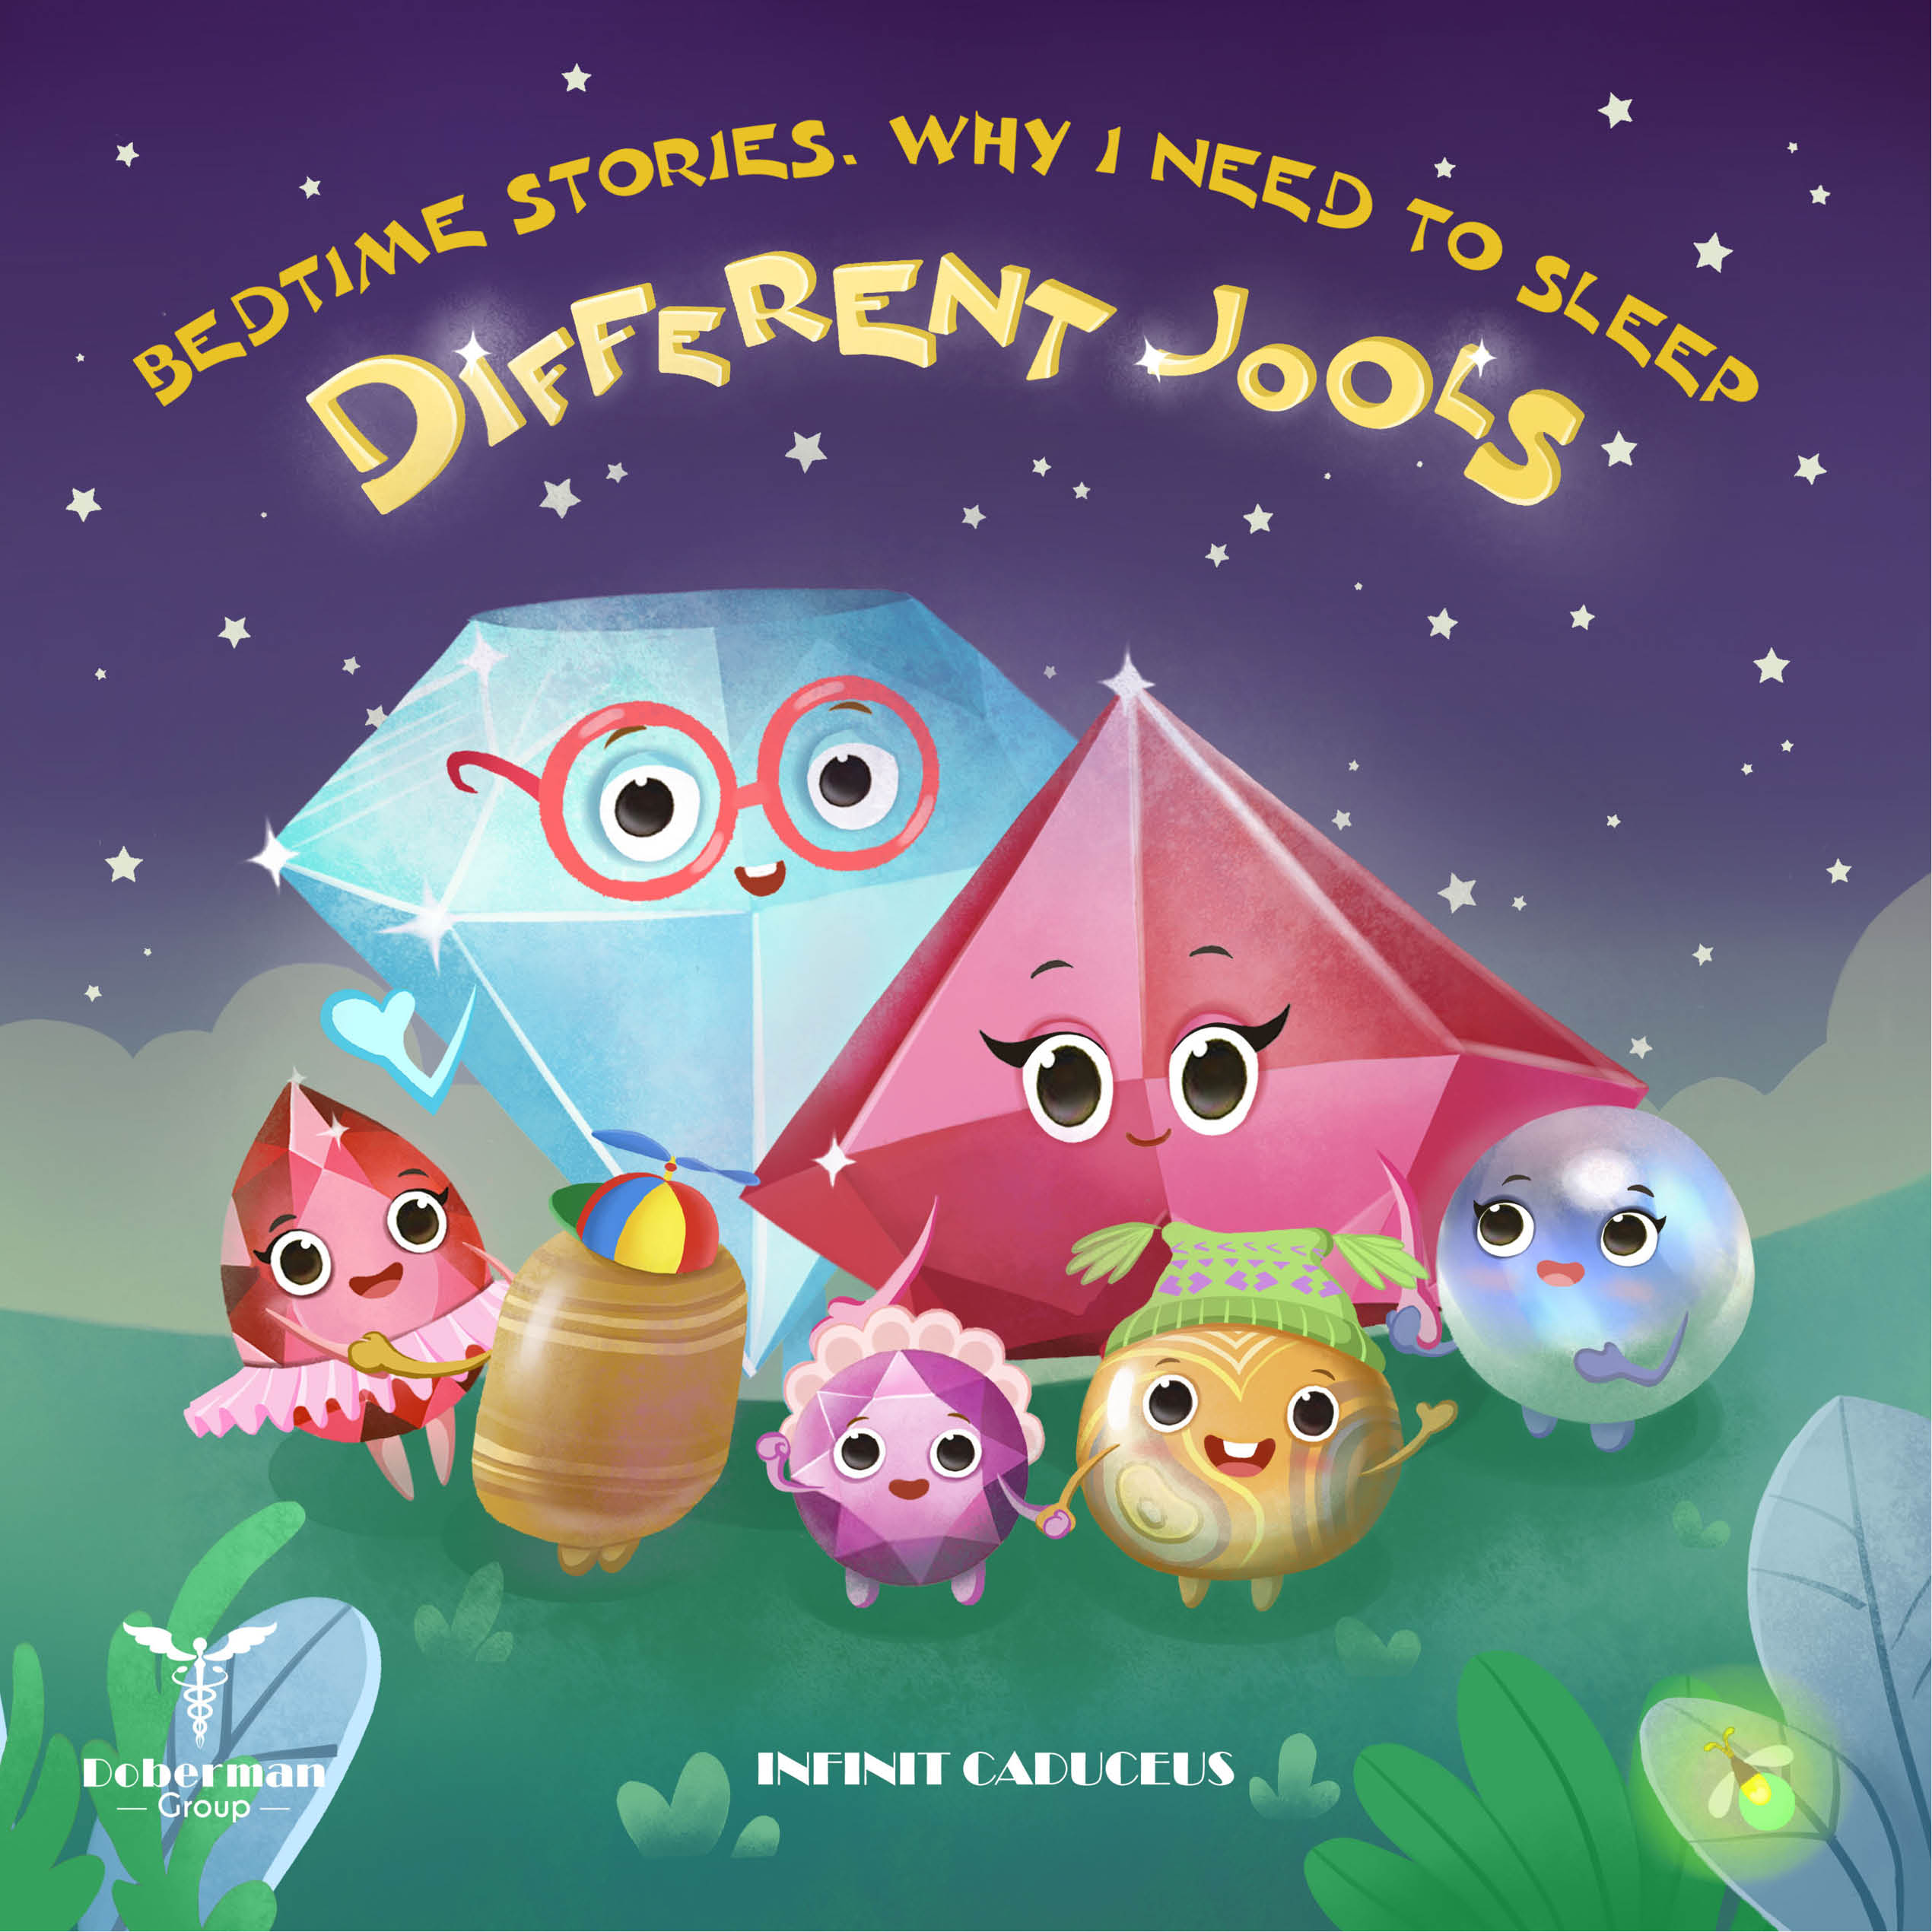 FREE: Bedtime stories, Why I need to sleep :Differen Jools by Infinit Caduceus